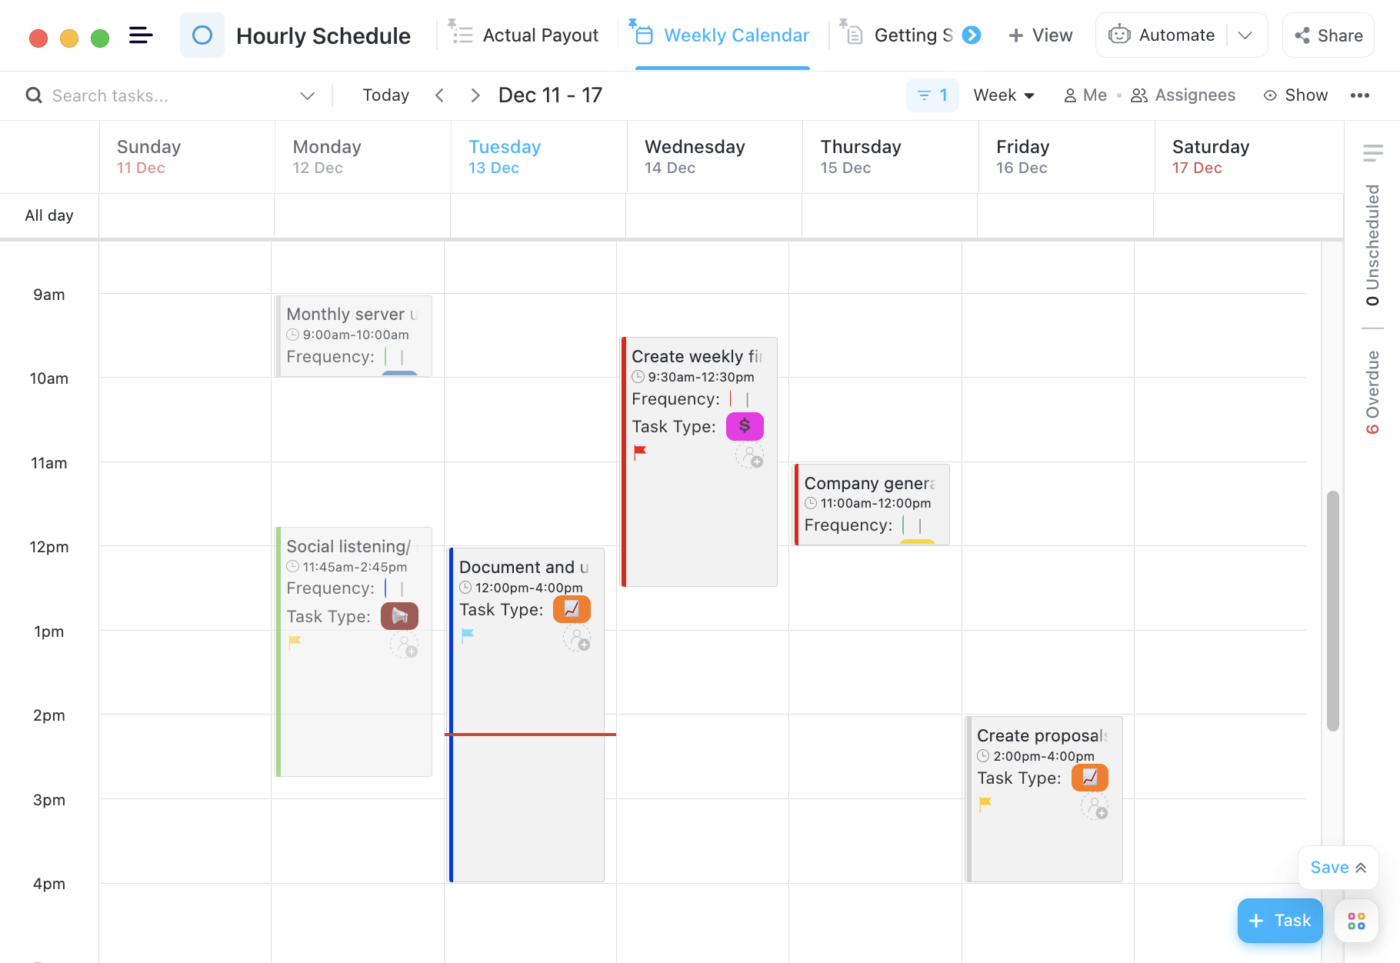 ClickUp Hourly Schedule Template